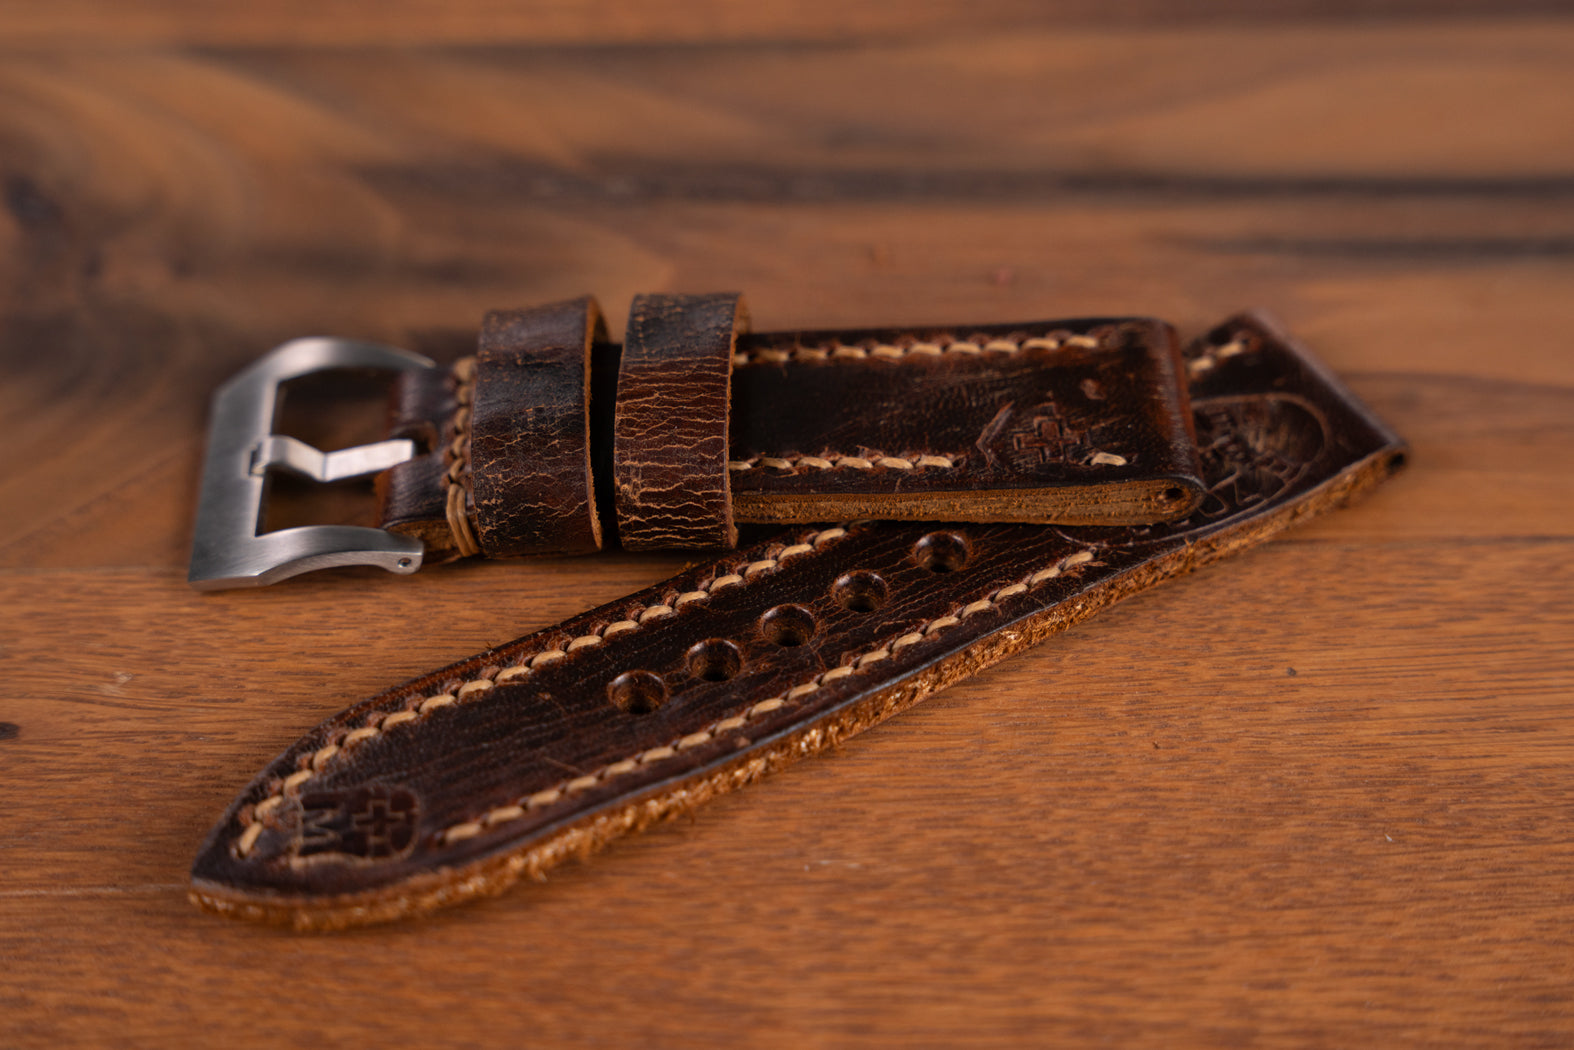 Ammo Watch Strap - 046 - In Stock!